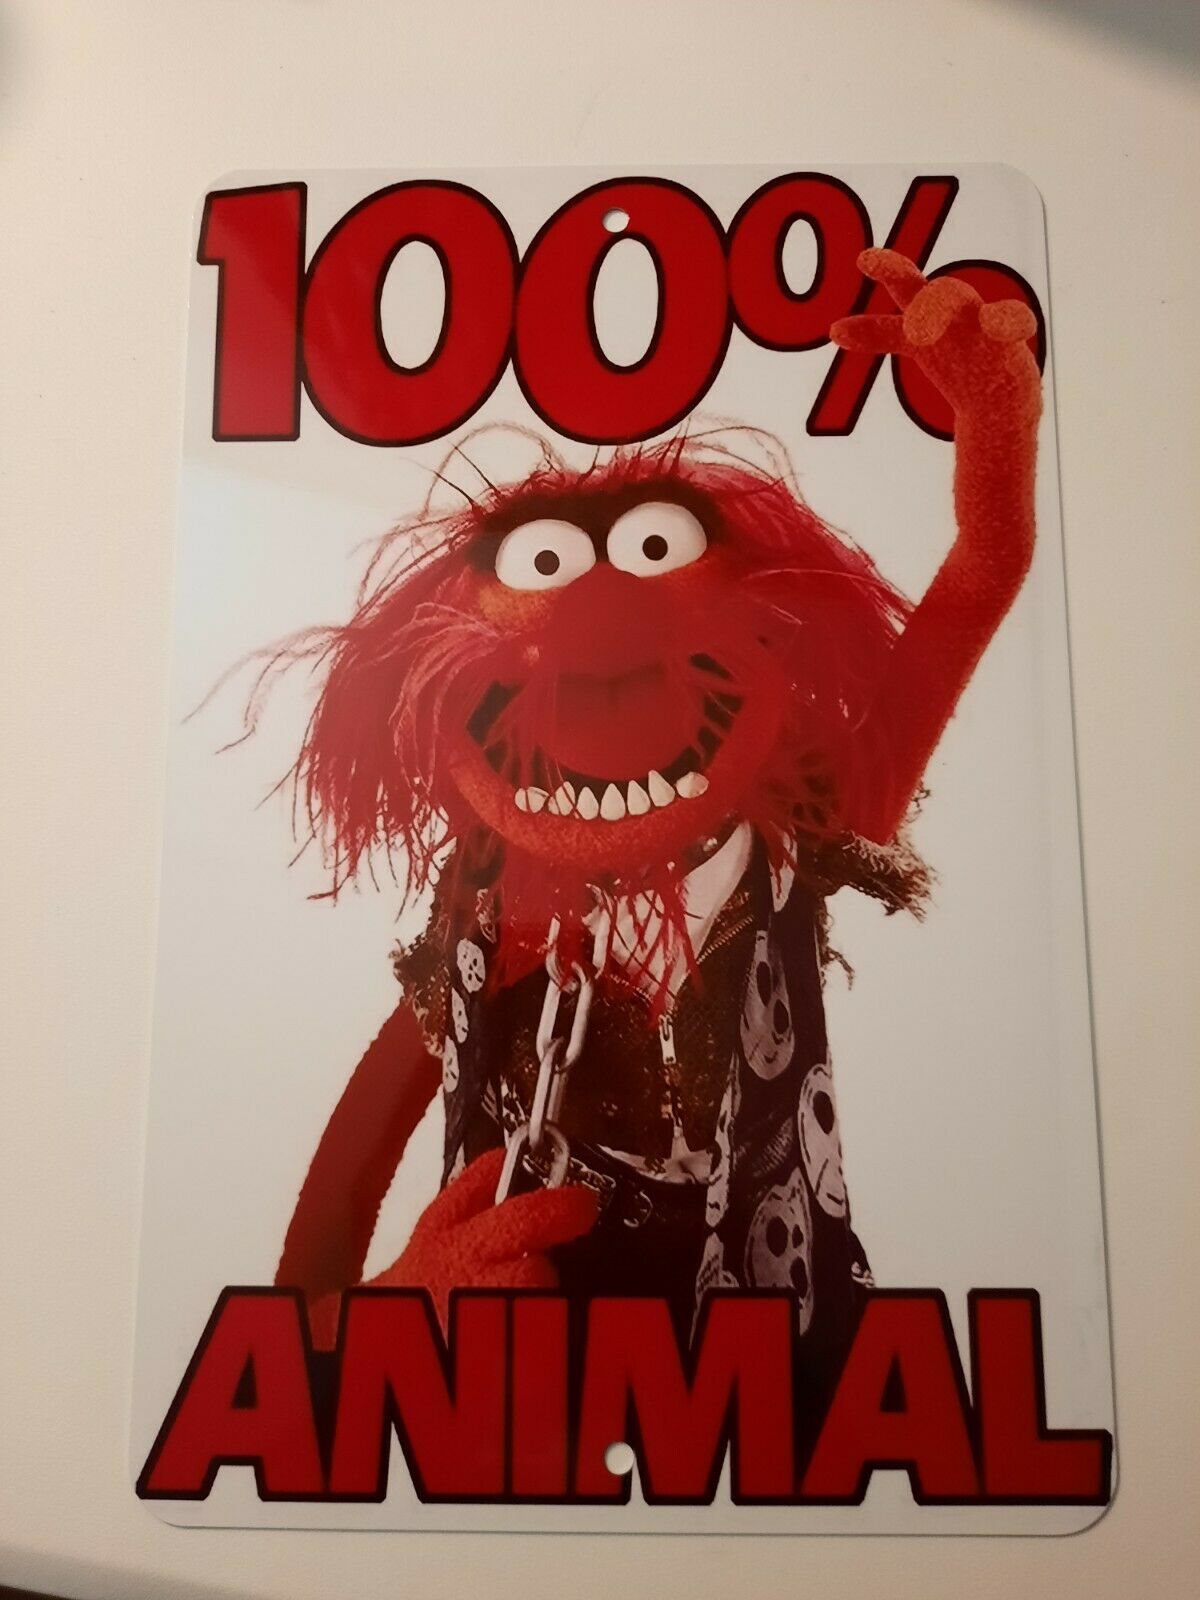 100% ANIMAL 8x12 Metal Wall Sign TV Show Movie Poster